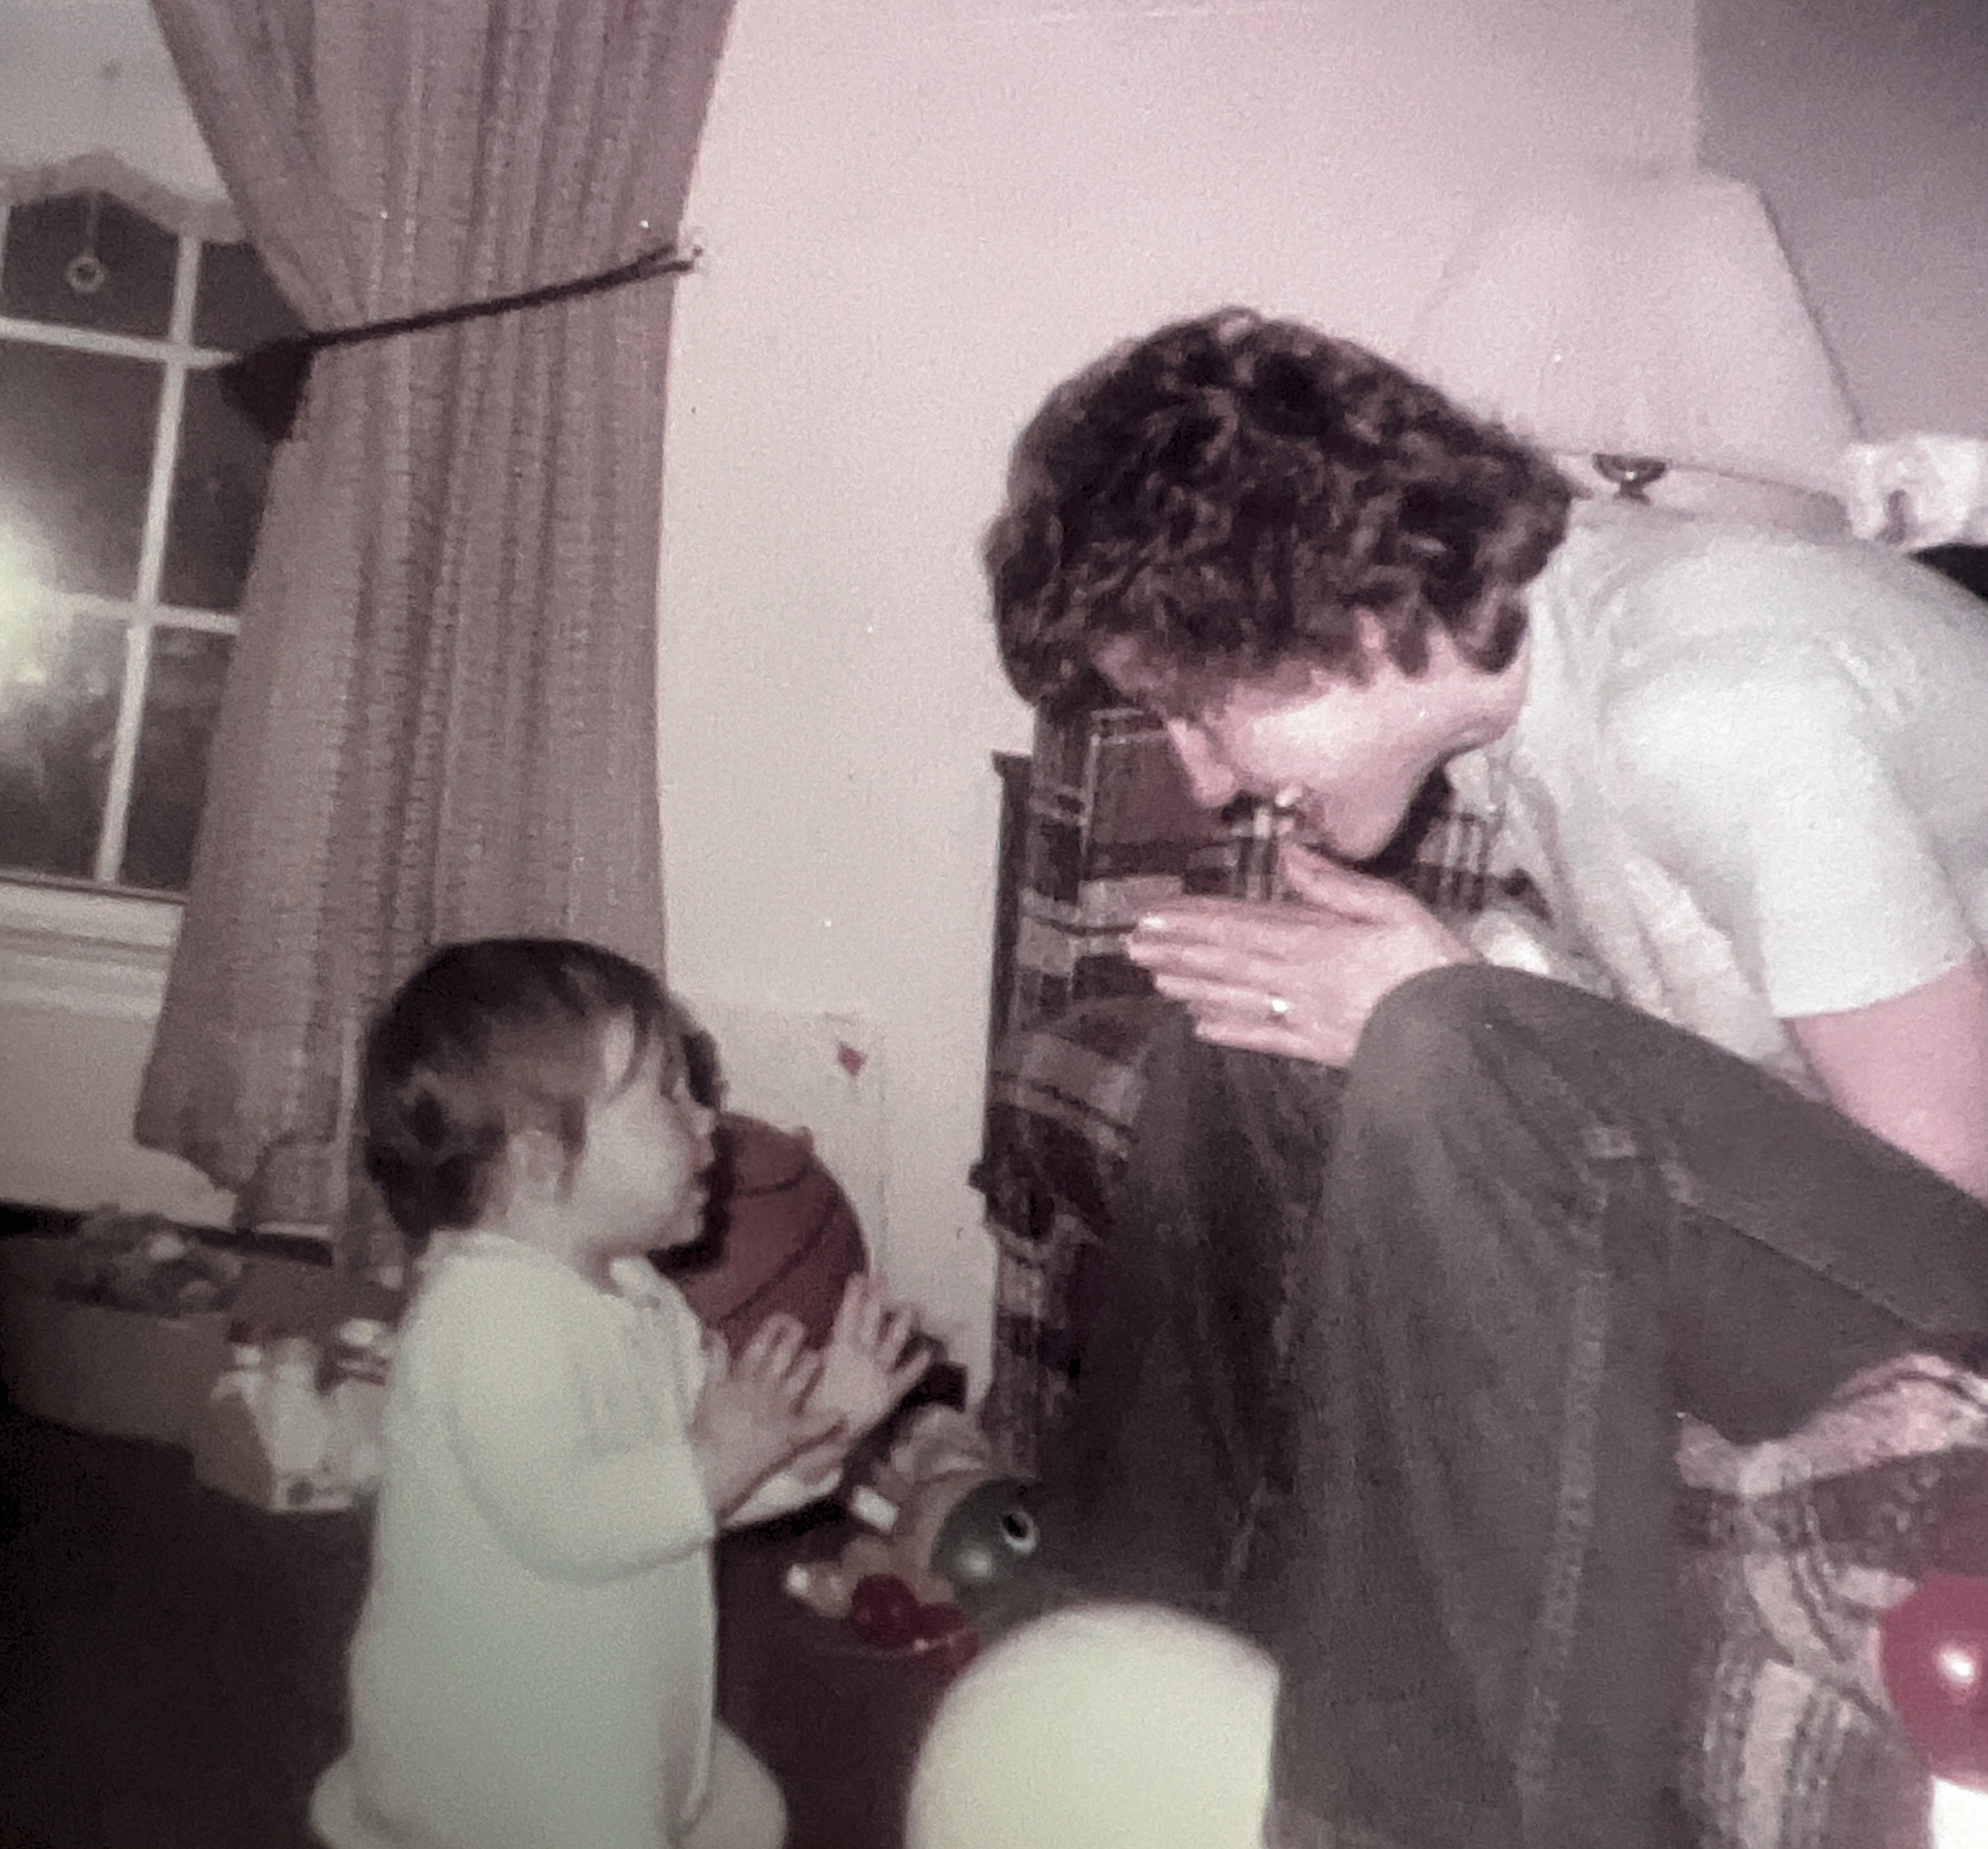 MJ and Stephanie playing Patey cake. March 1983